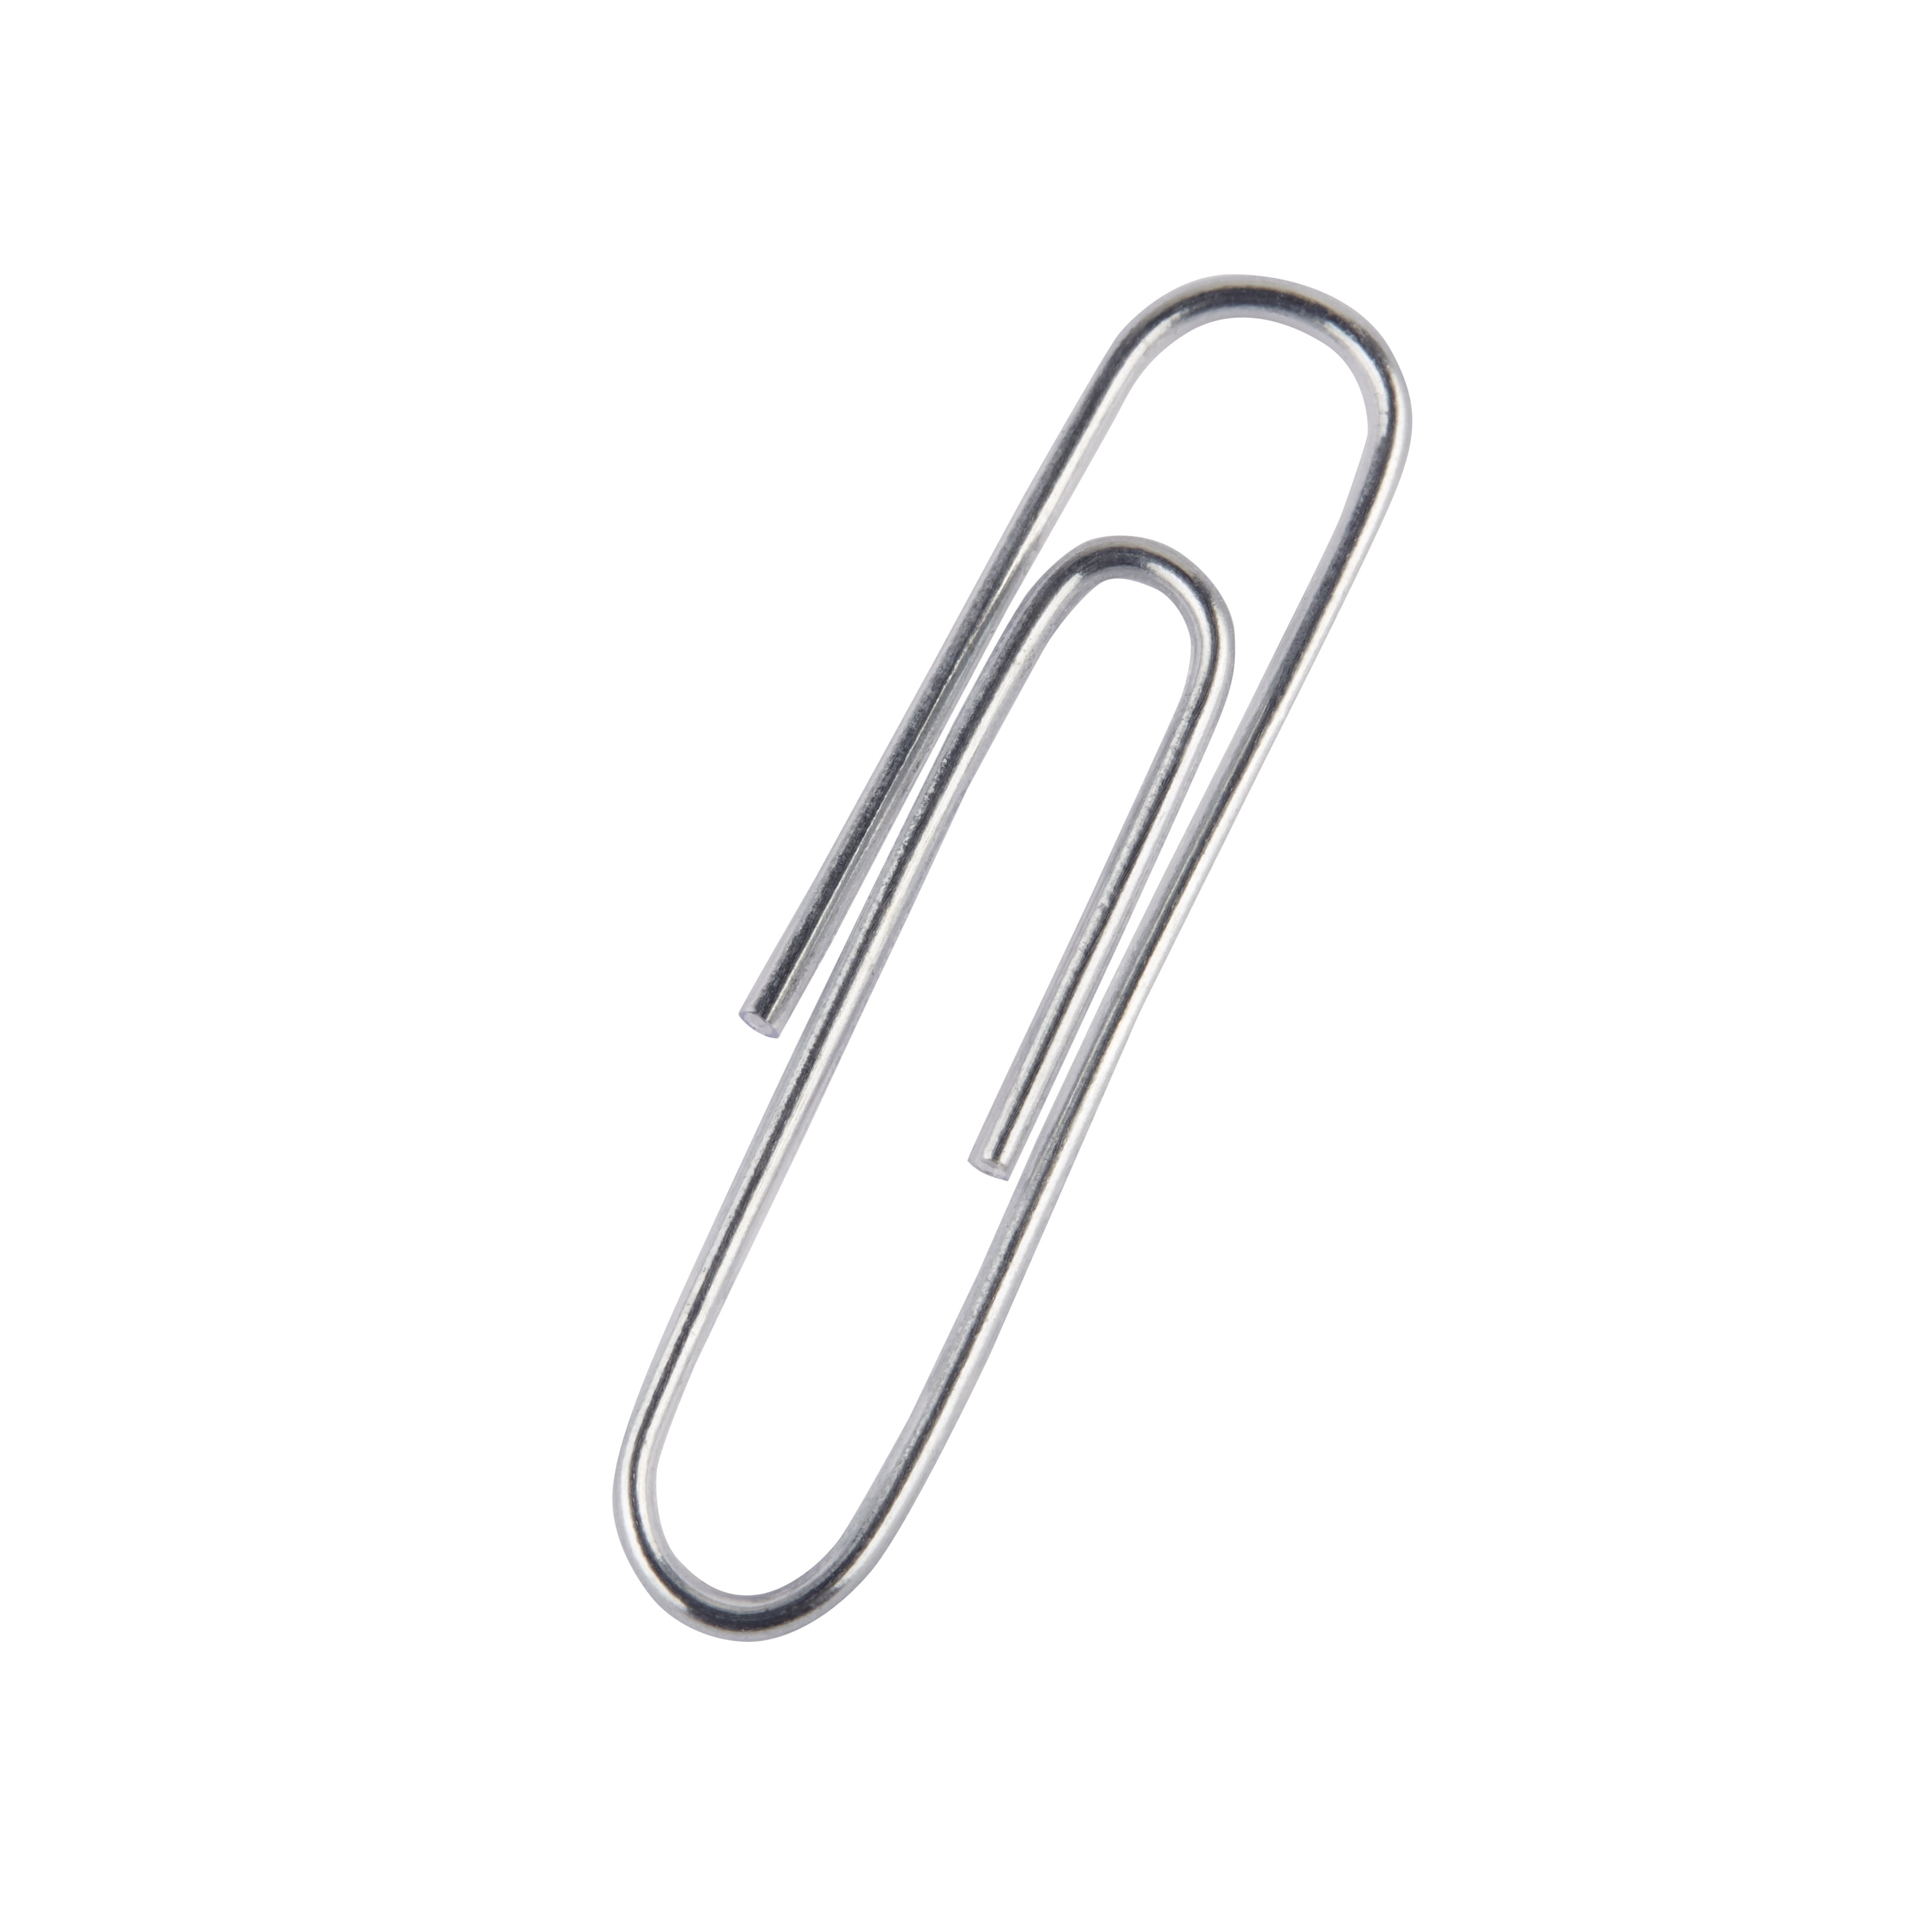 Officemate Giant Paper Clips Pack of 10 Boxes of 100 Clips Each 1,000 Clips Total 99914 